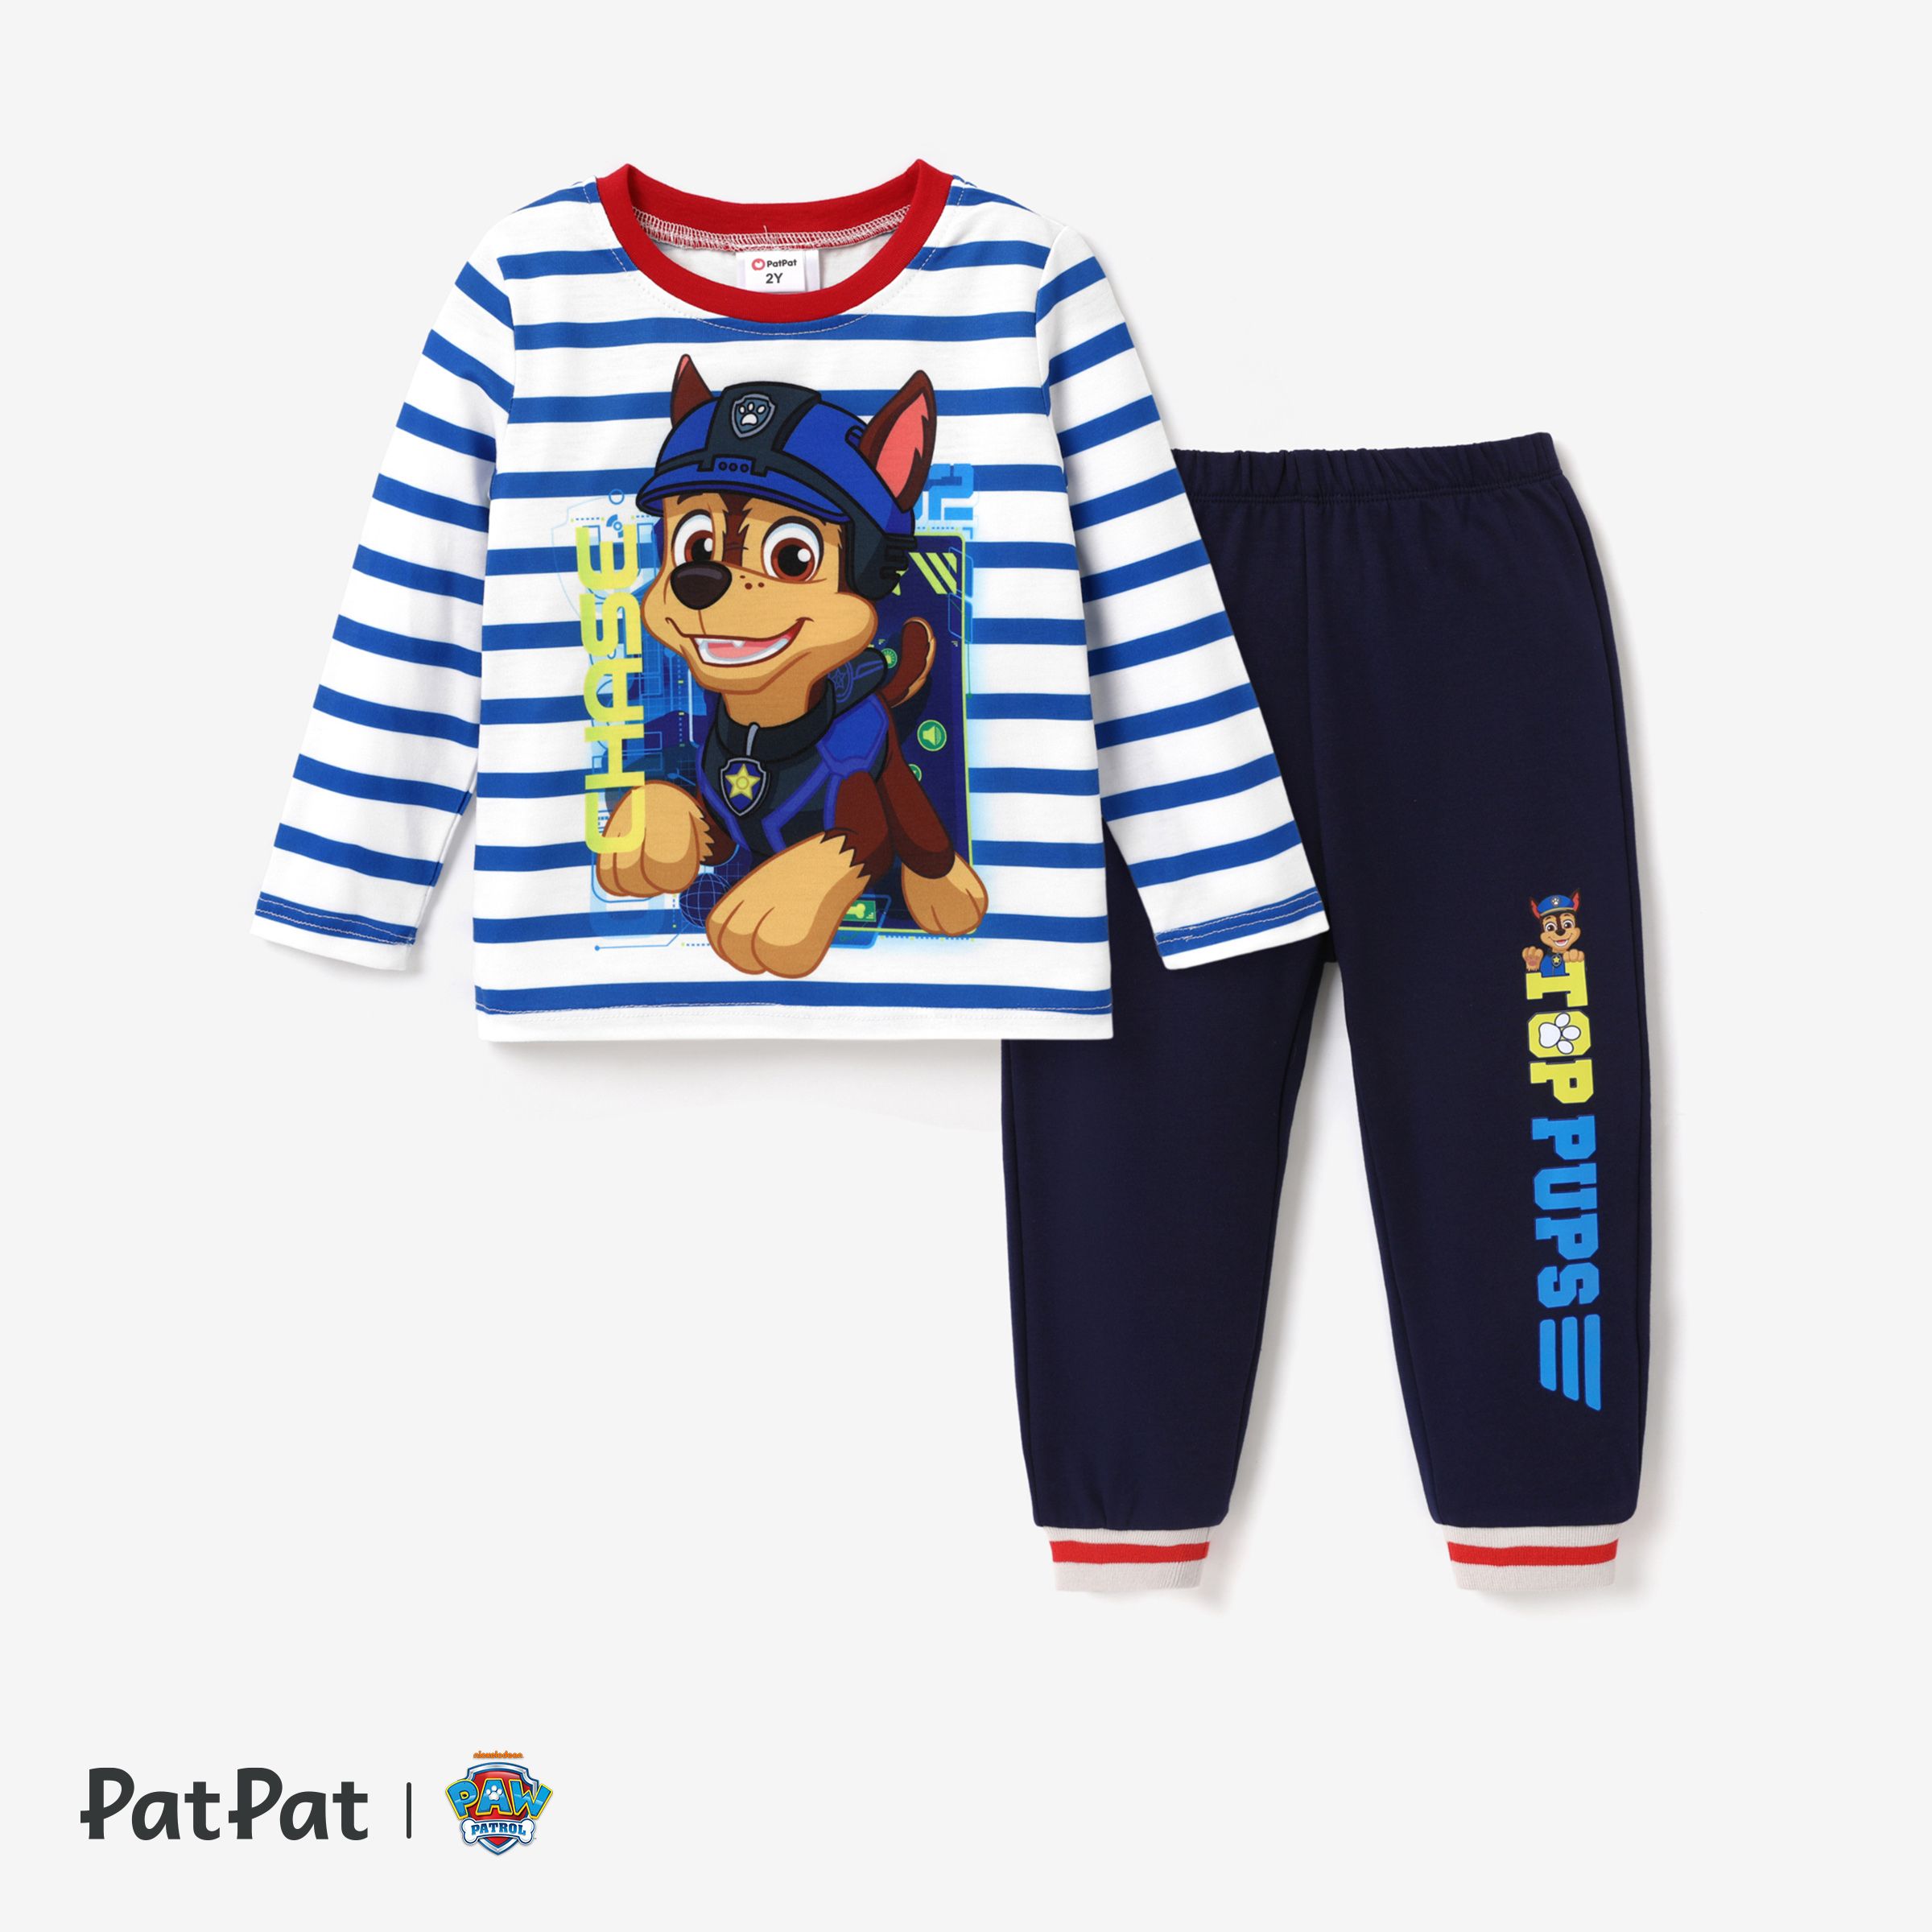 PAW Patrol Toddler Boy Embroidered Character Jacket or Sweatshirt and Pants Set